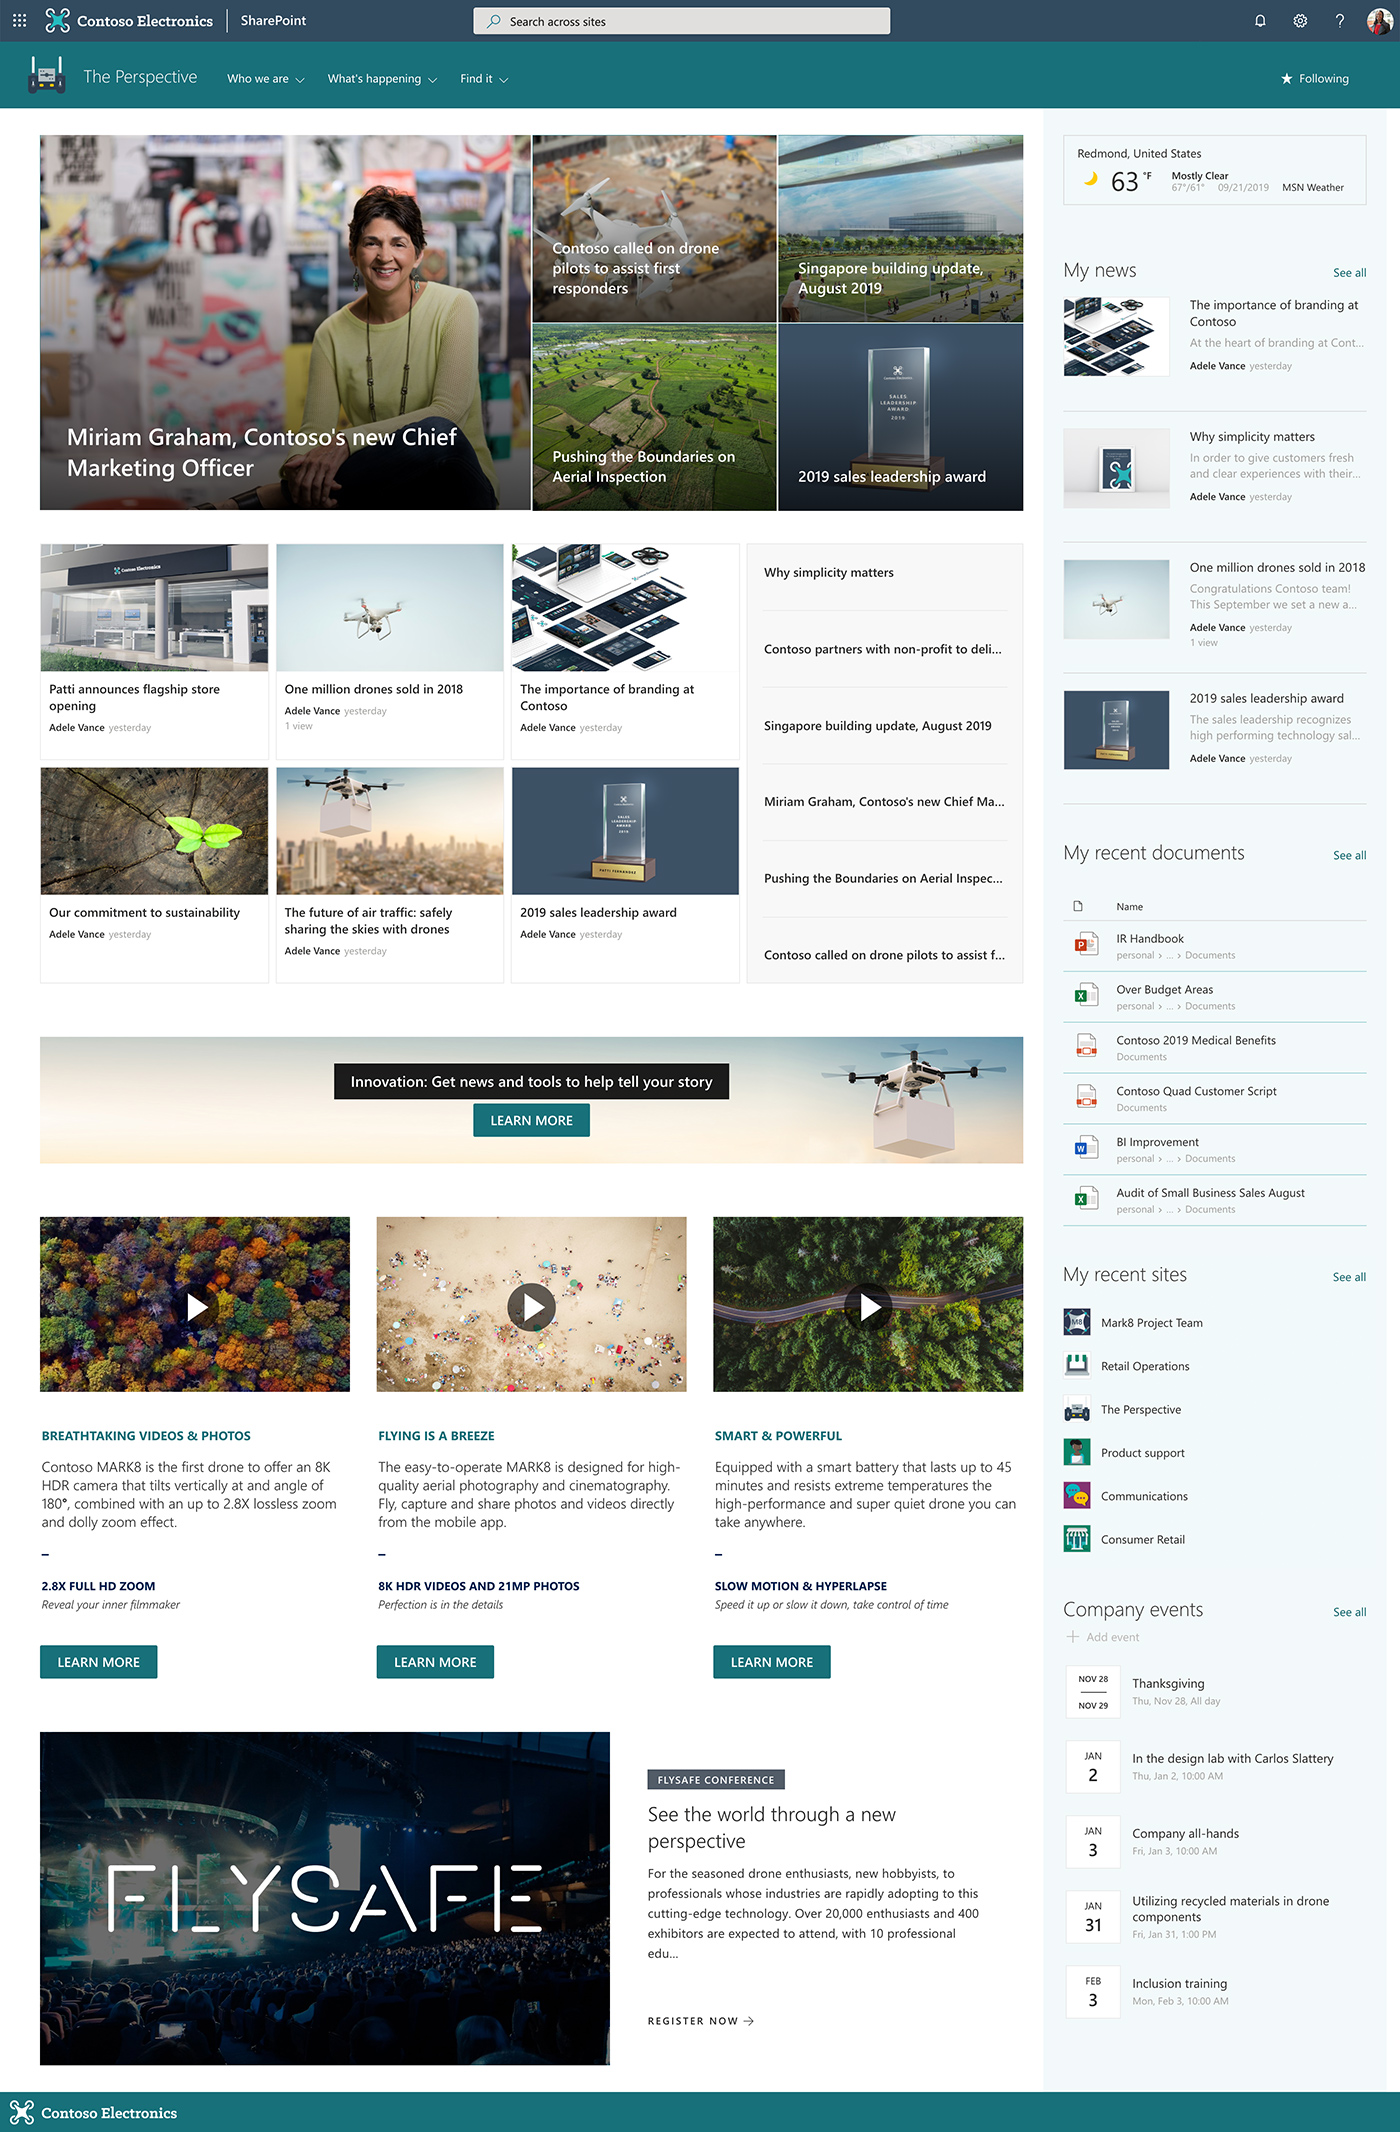 25 great examples of SharePoint Intranet - Microsoft 365 atWork